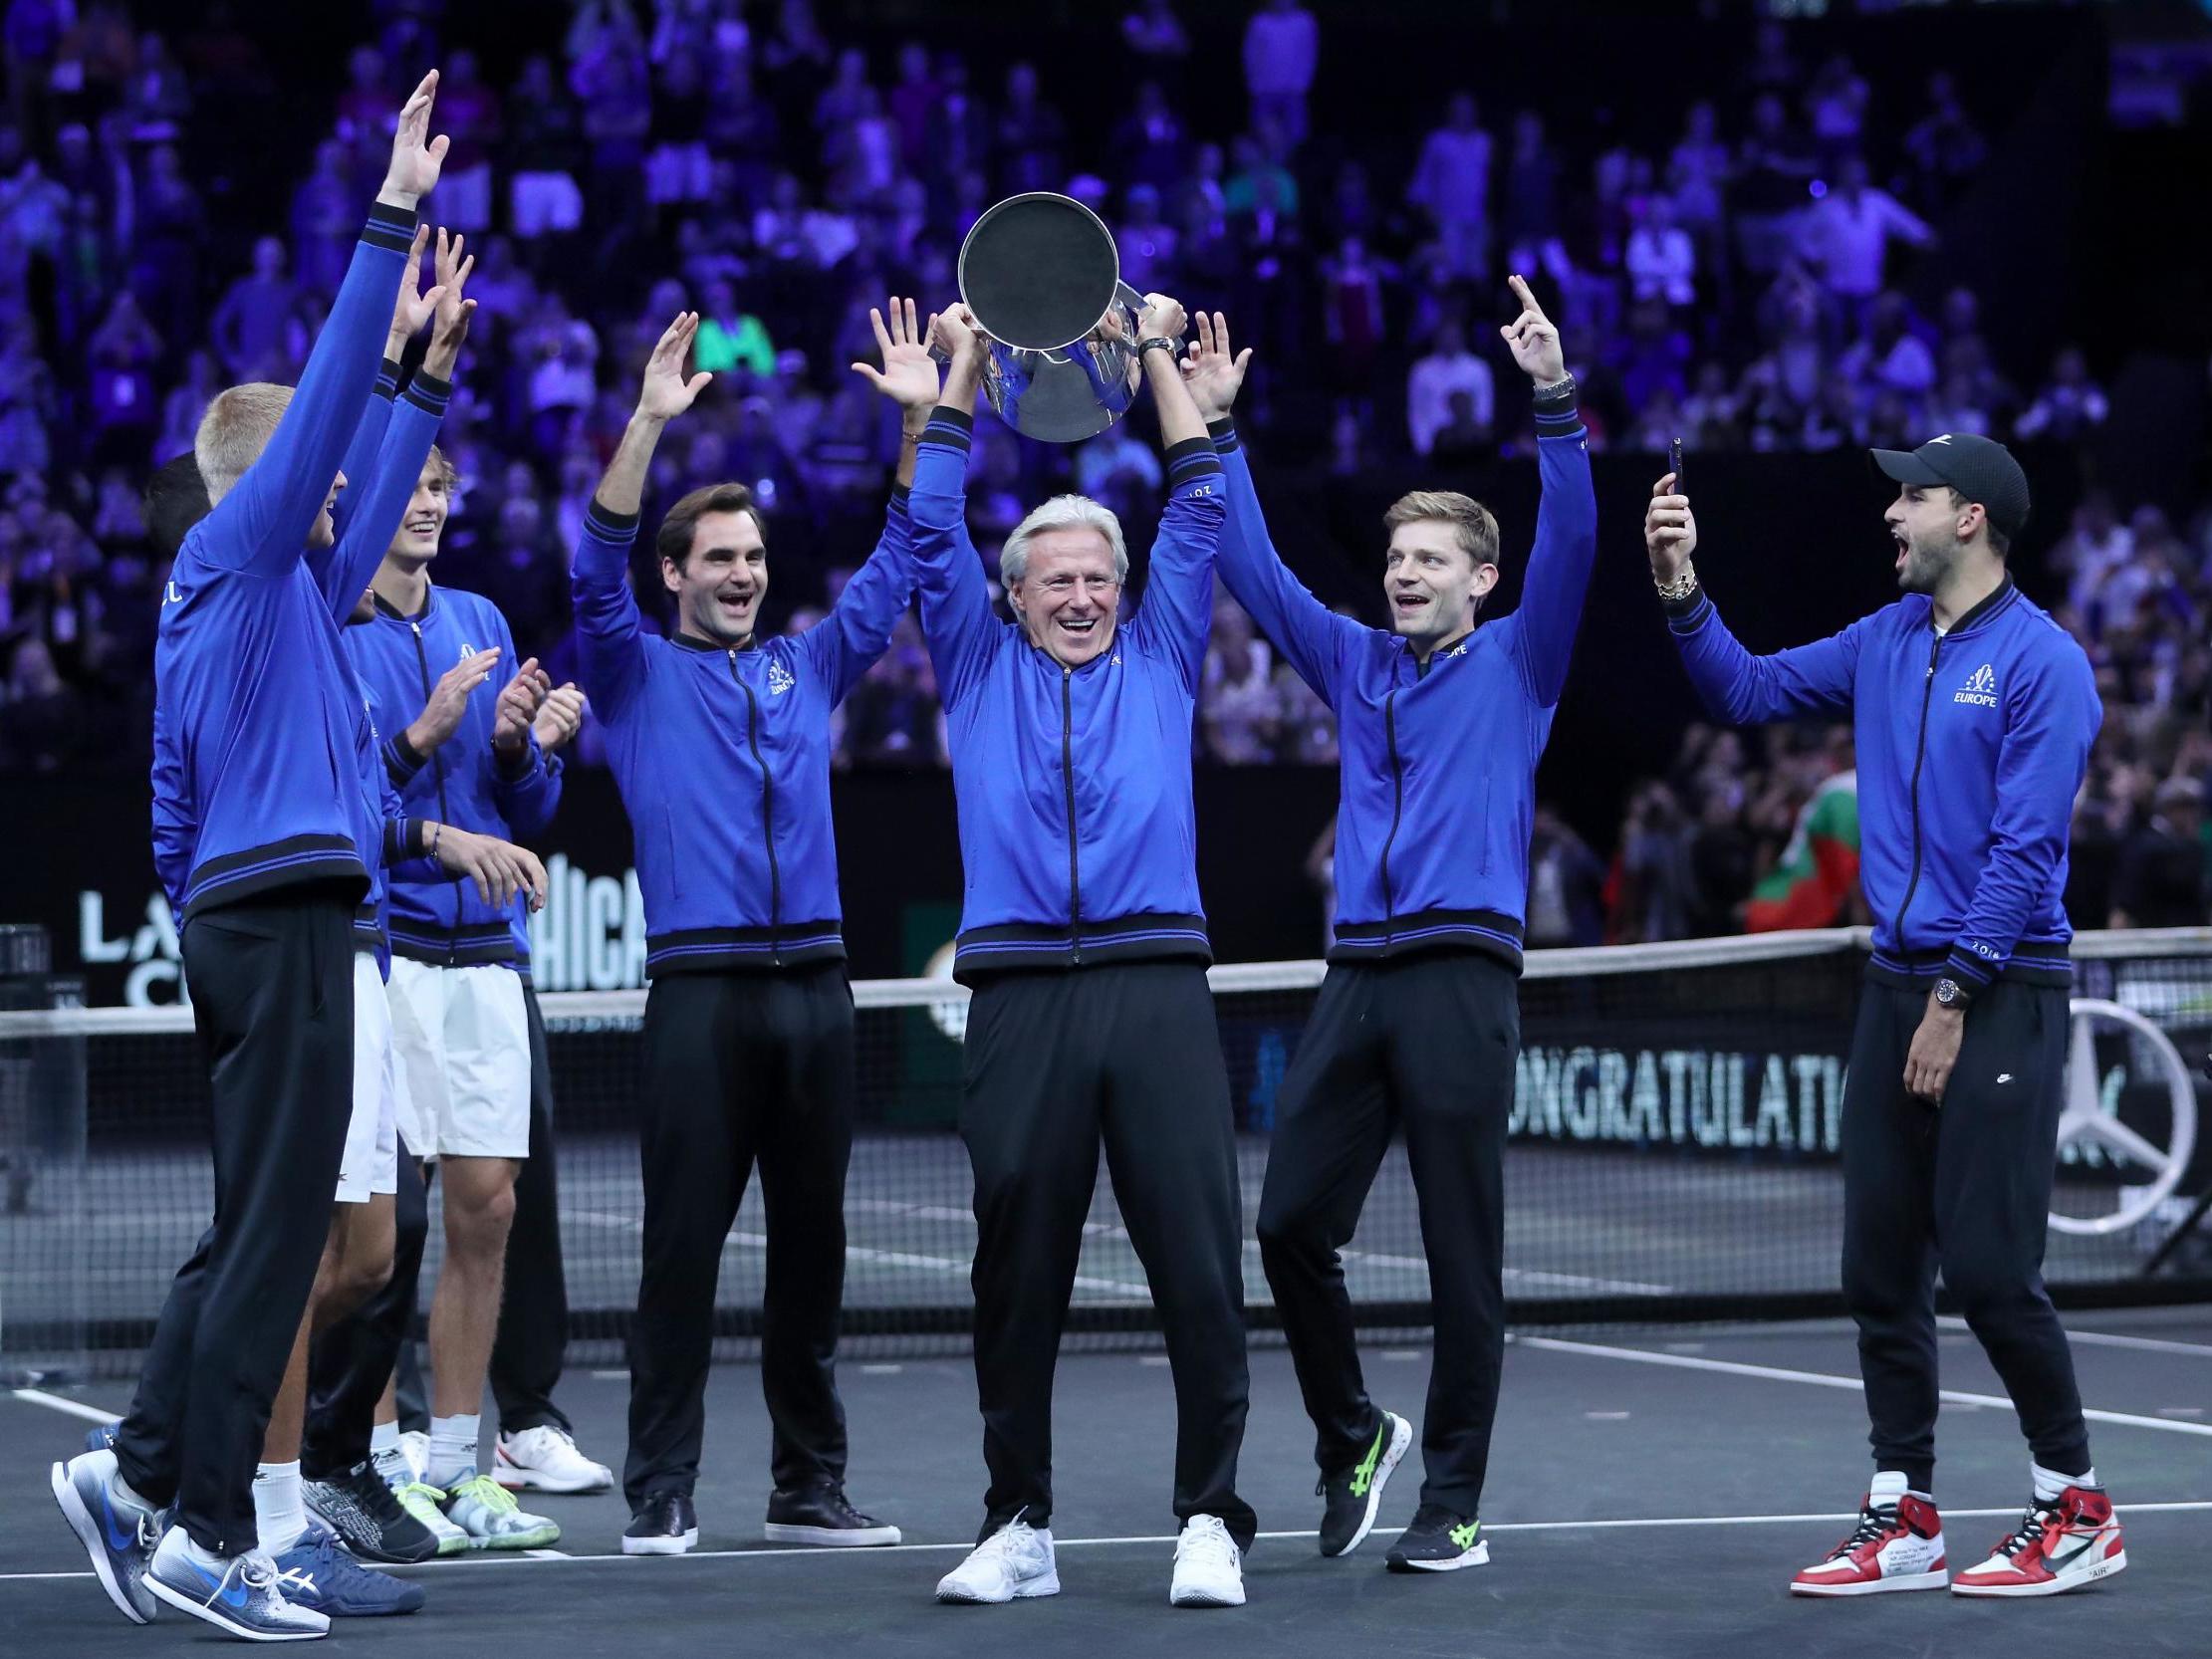 The Laver Cup competition has proved a big success